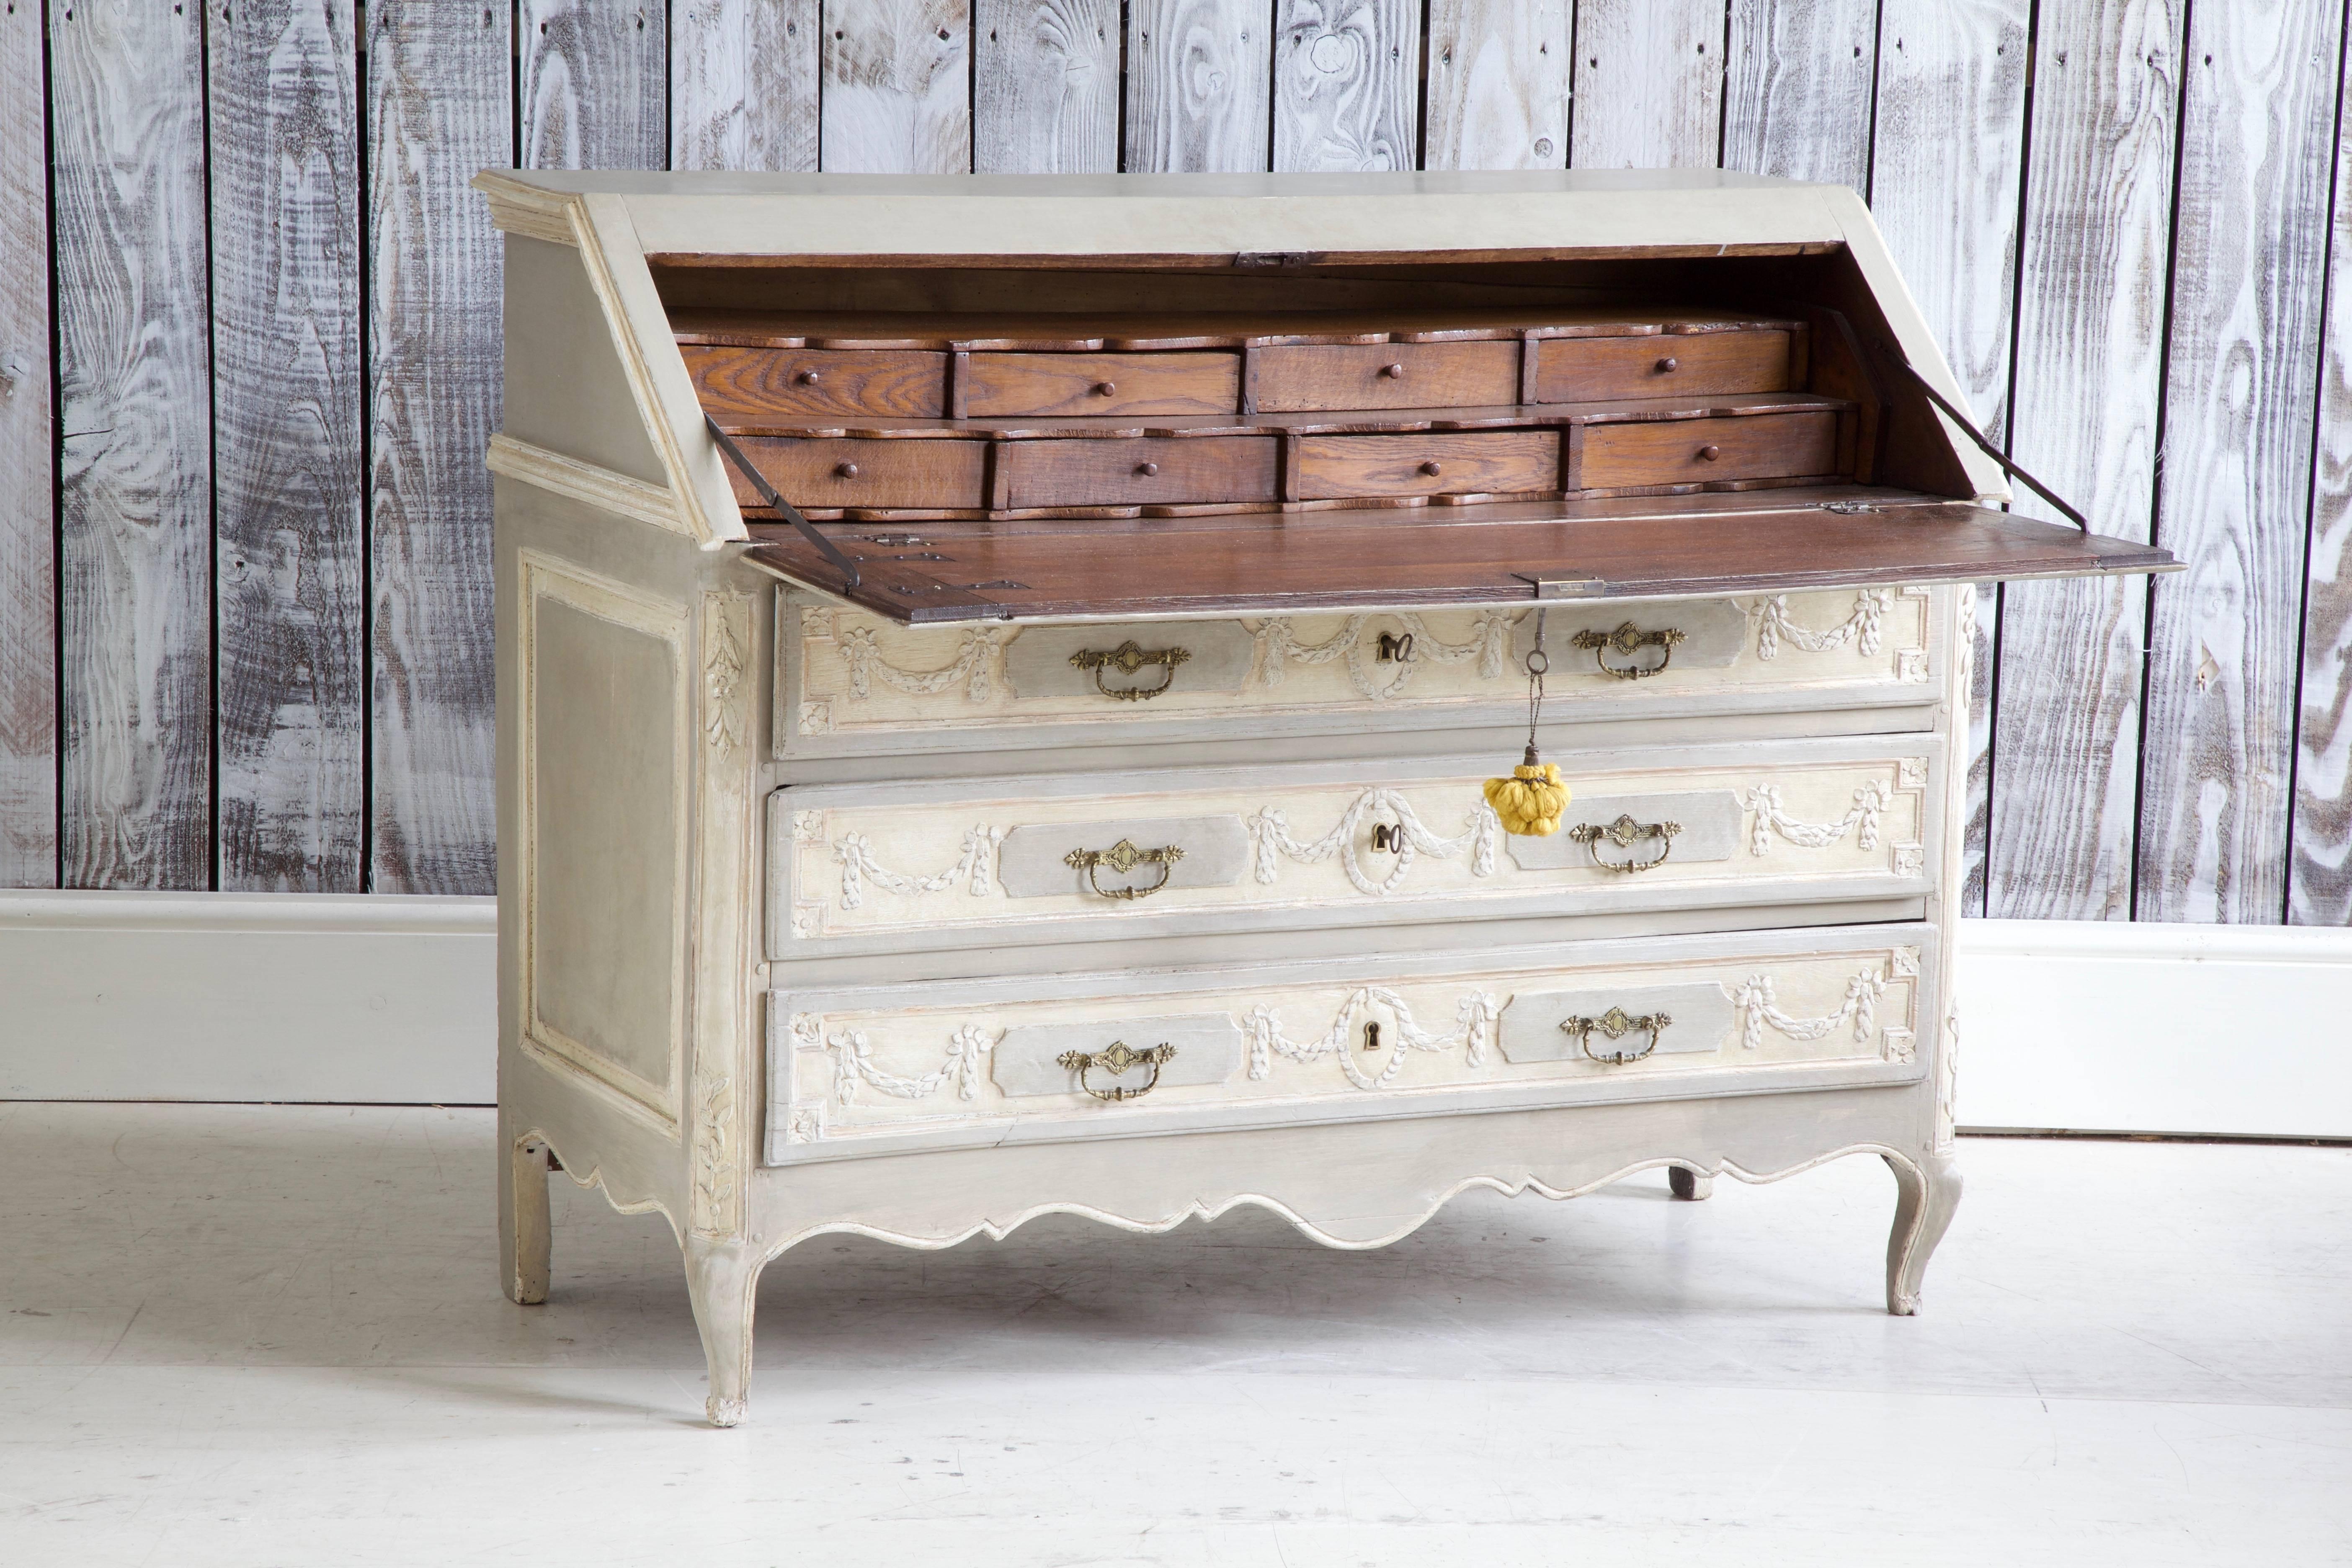 18th century, French, Louis XVI writing desk/scriban decorated with hand carved, swathes of laurel leaf across the top section and drawers, painted in two tones of French grey with warm white highlights, moderately aged and distressed. The drop leaf